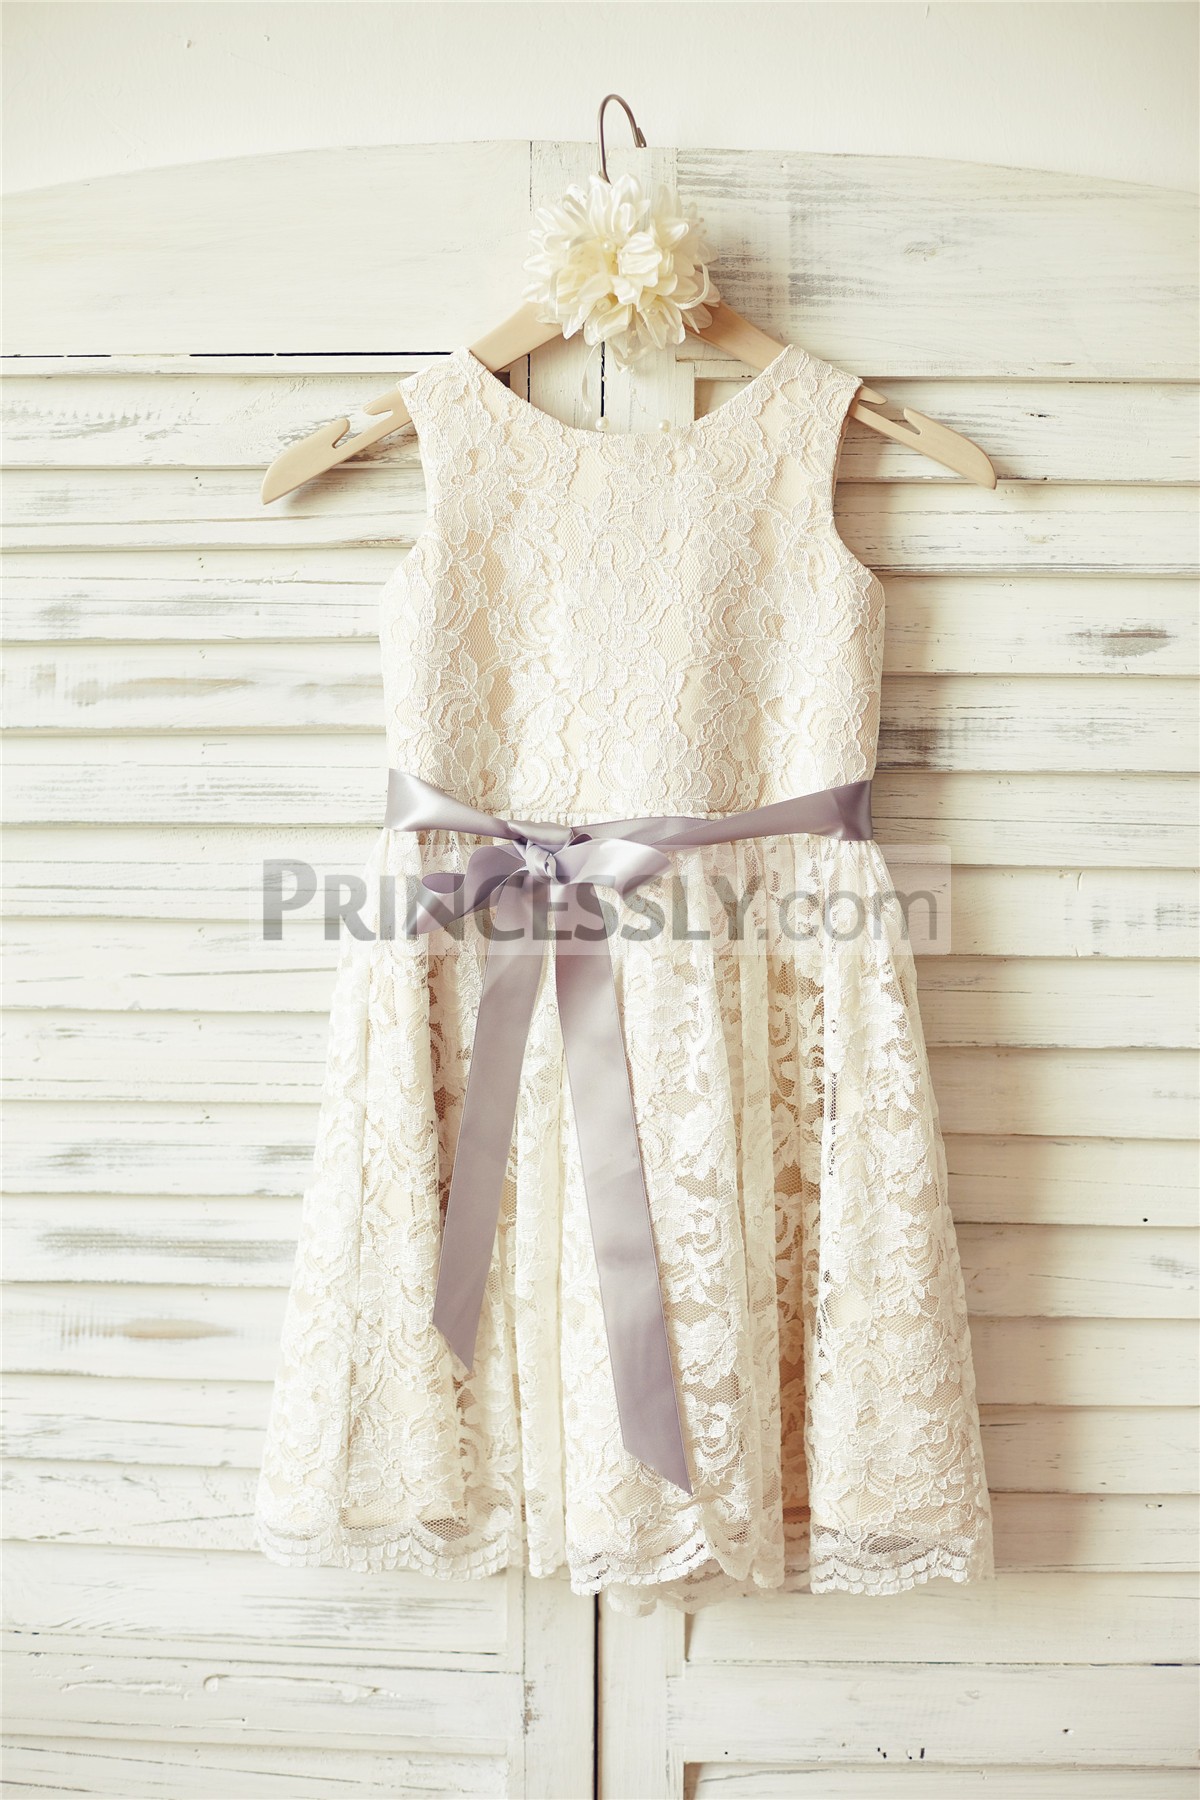 Princessly.com-K1000090-Ivory Lace Champagne lining Flower Girl Dress with silver sash-31